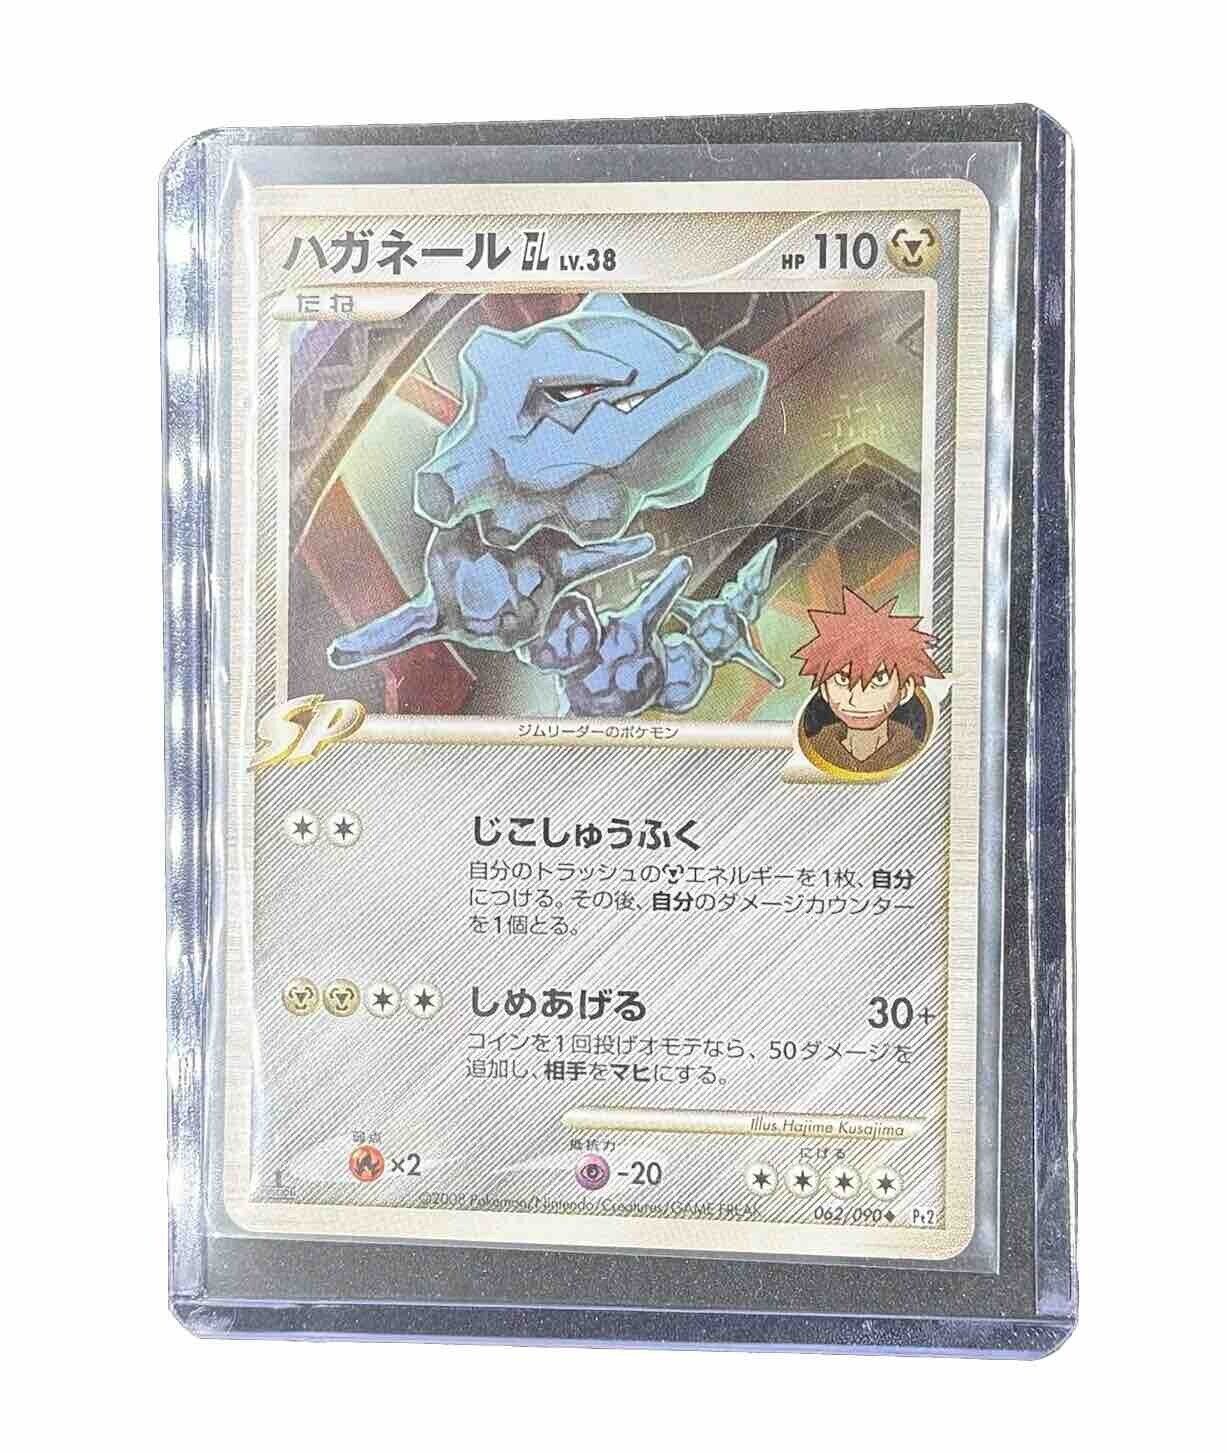 Steelix GL [1st Edition] #62 Pokemon Japanese Bonds To The End Of Time Pt2 HP